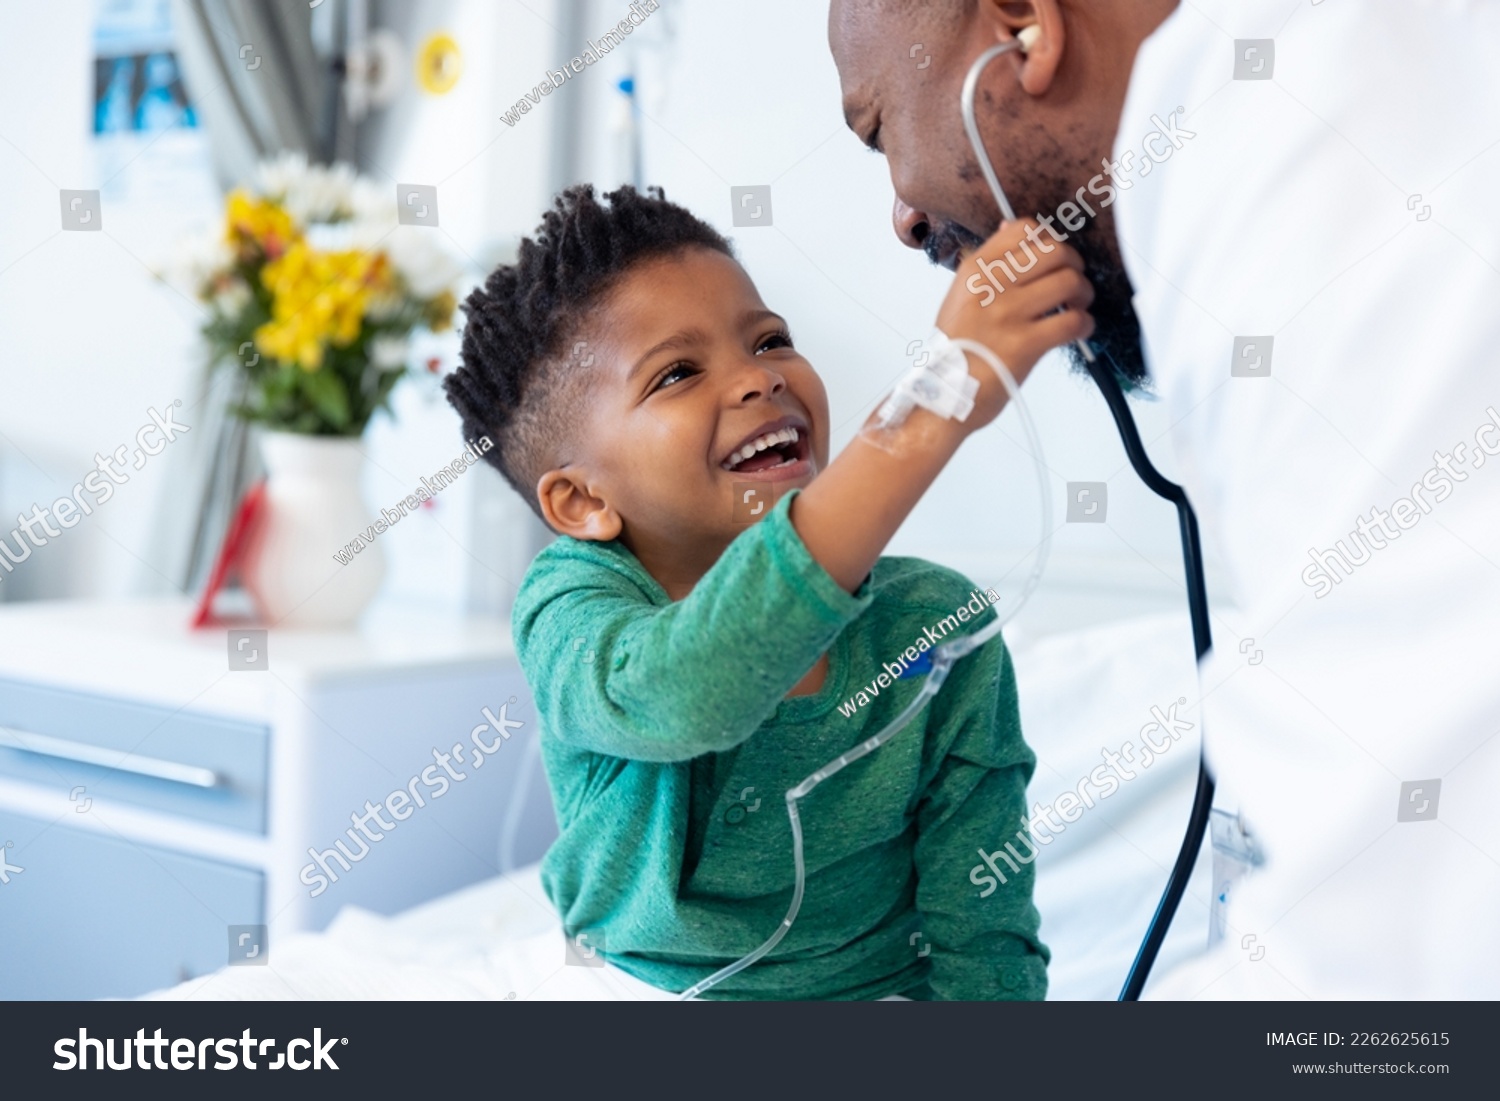 Laughing african american boy patient taking male doctor's stethoscope in hospital. Hospital, medical and healthcare services. #2262625615